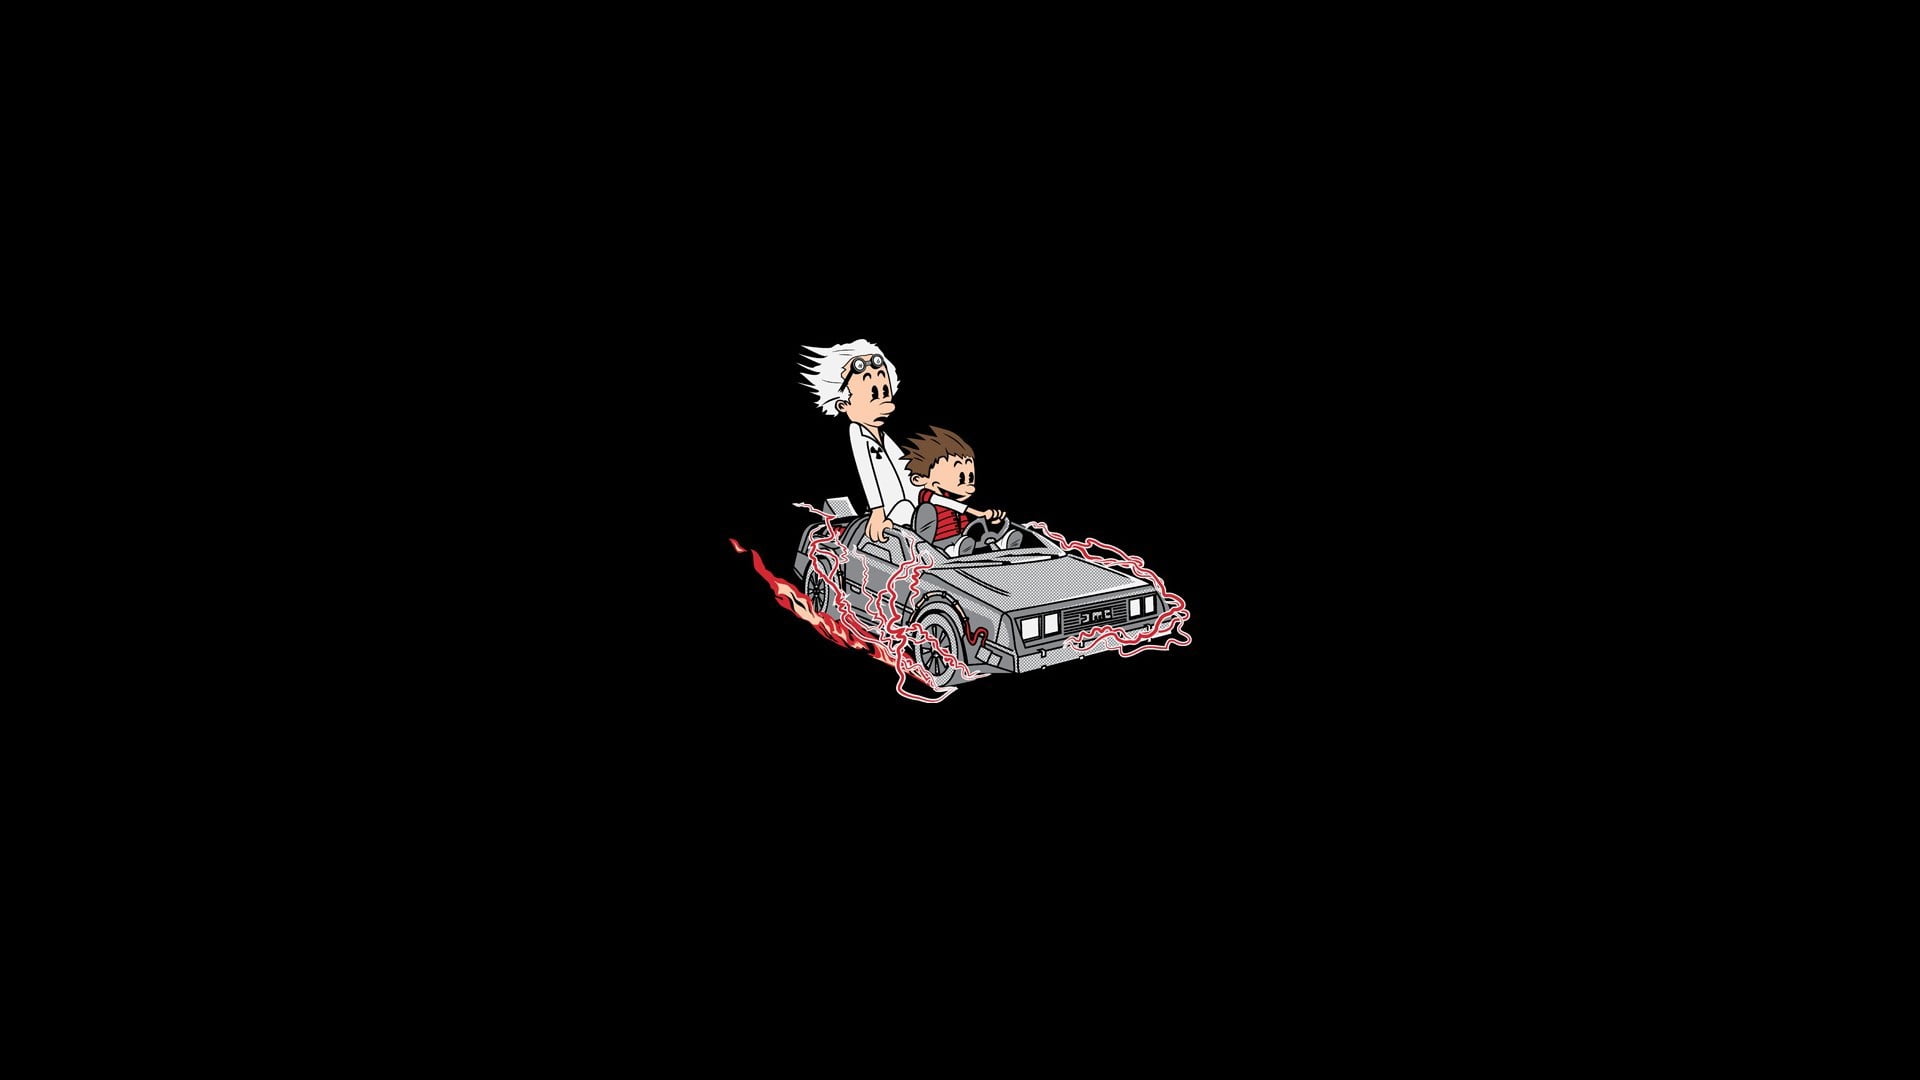 man driving a vehicle illustration, Back to the Future, Calvin and Hobbes